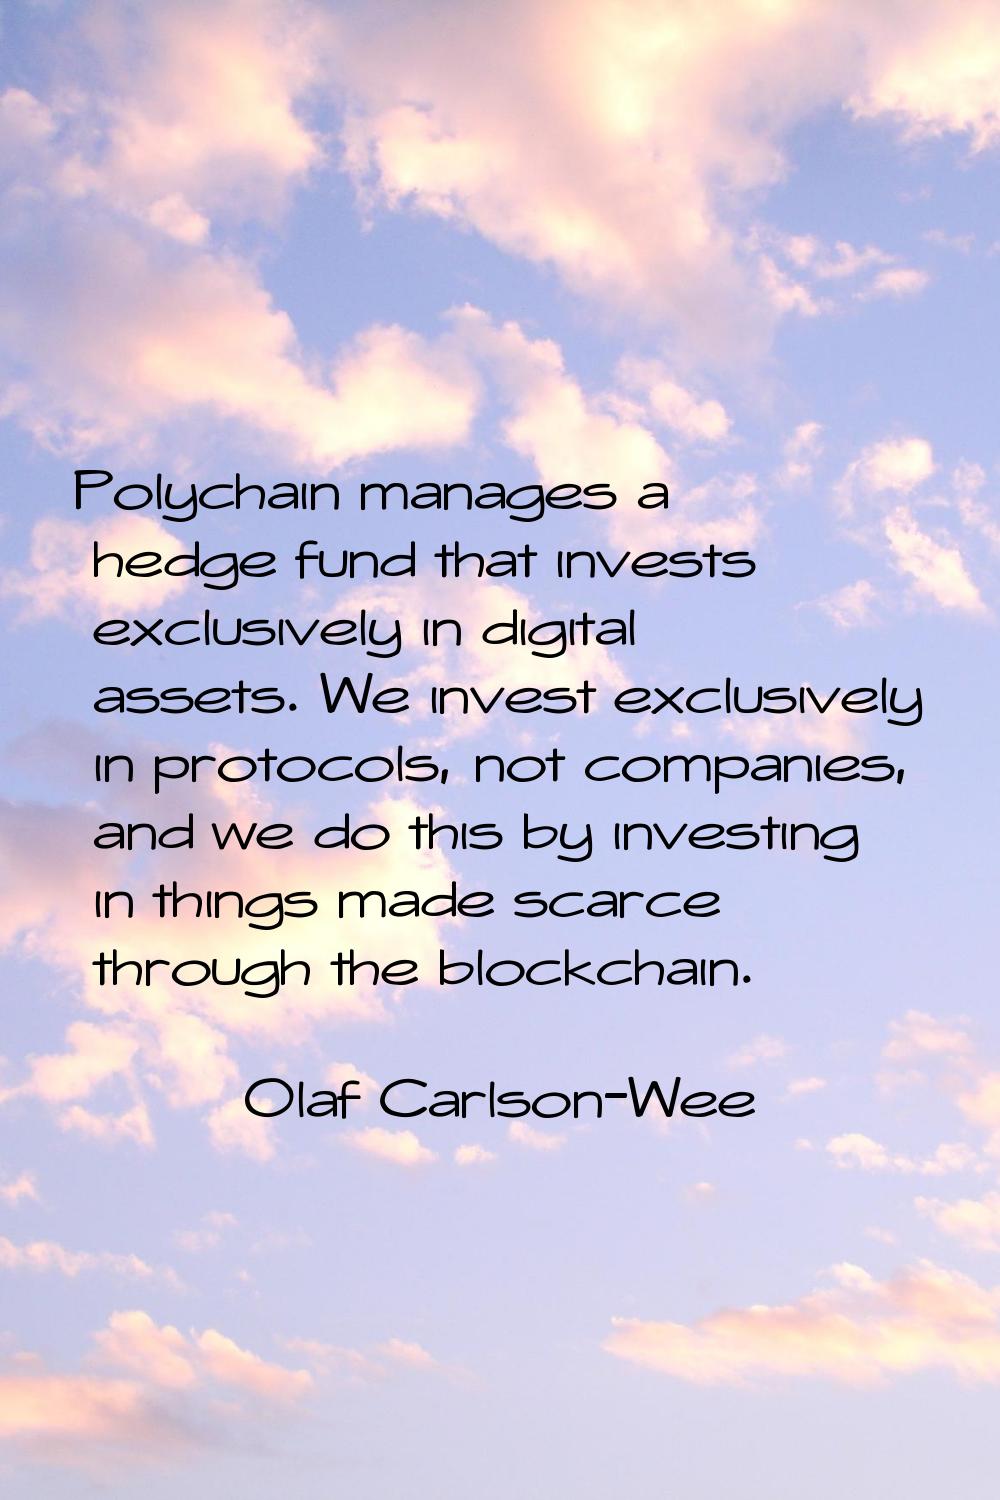 Polychain manages a hedge fund that invests exclusively in digital assets. We invest exclusively in